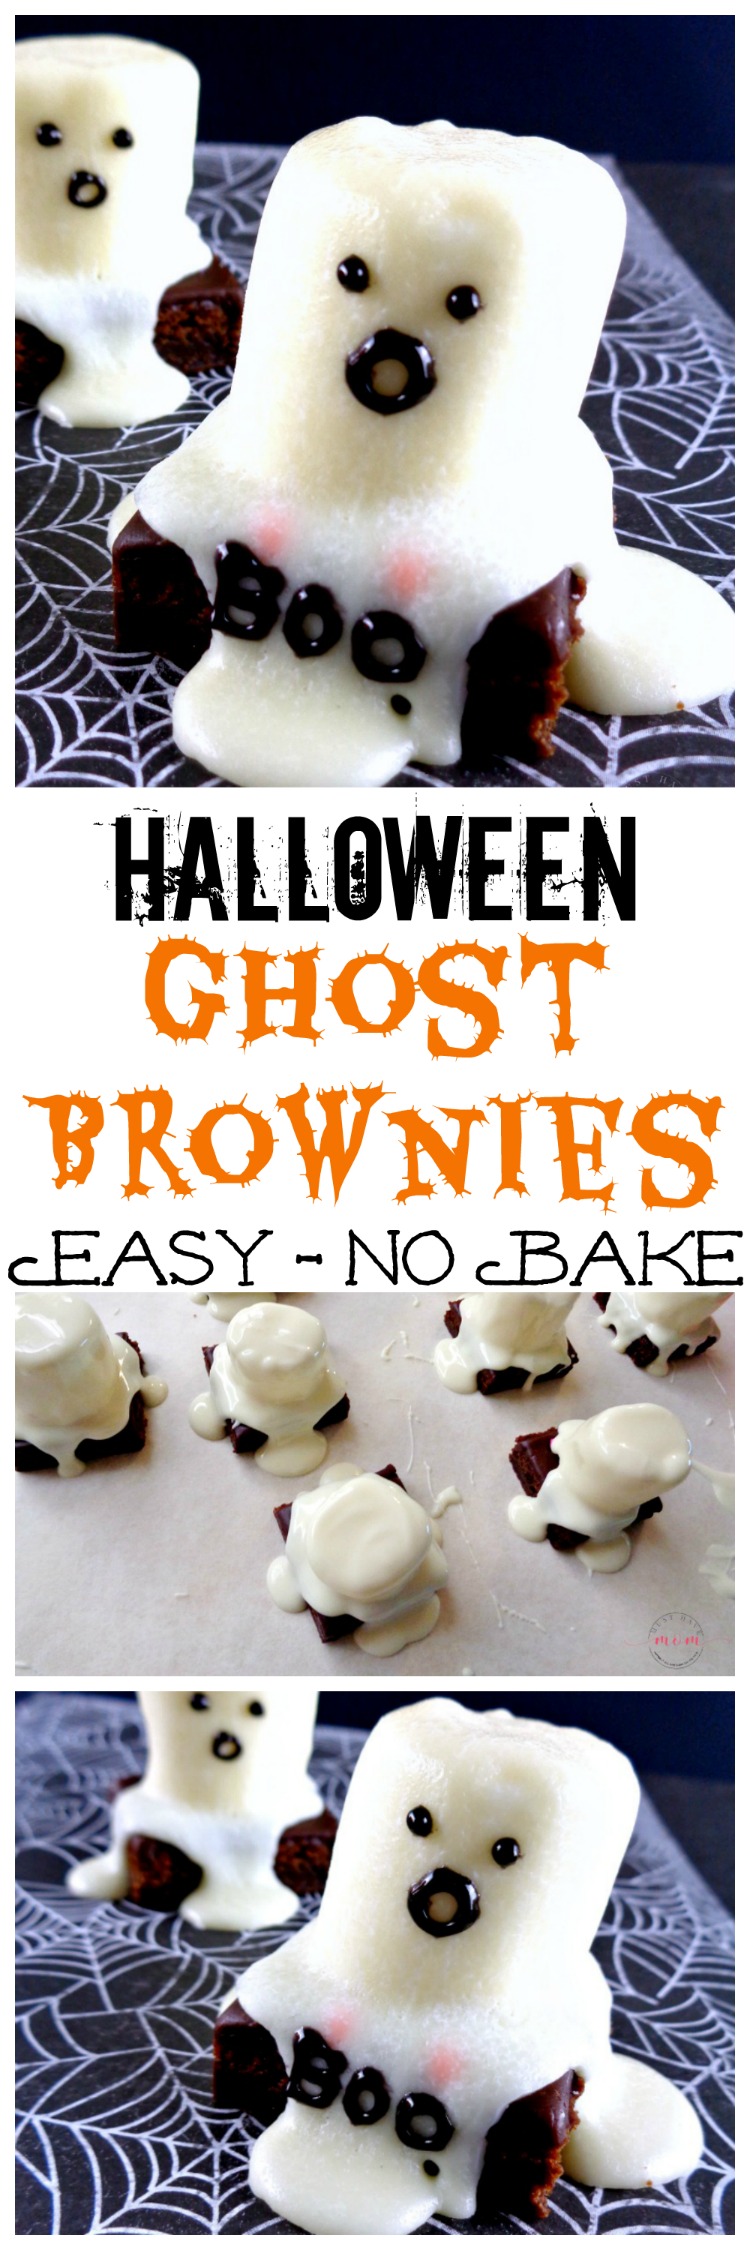 Quick and EASY Halloween brownies with ghosts!! This is a no bake recipe kids can make!